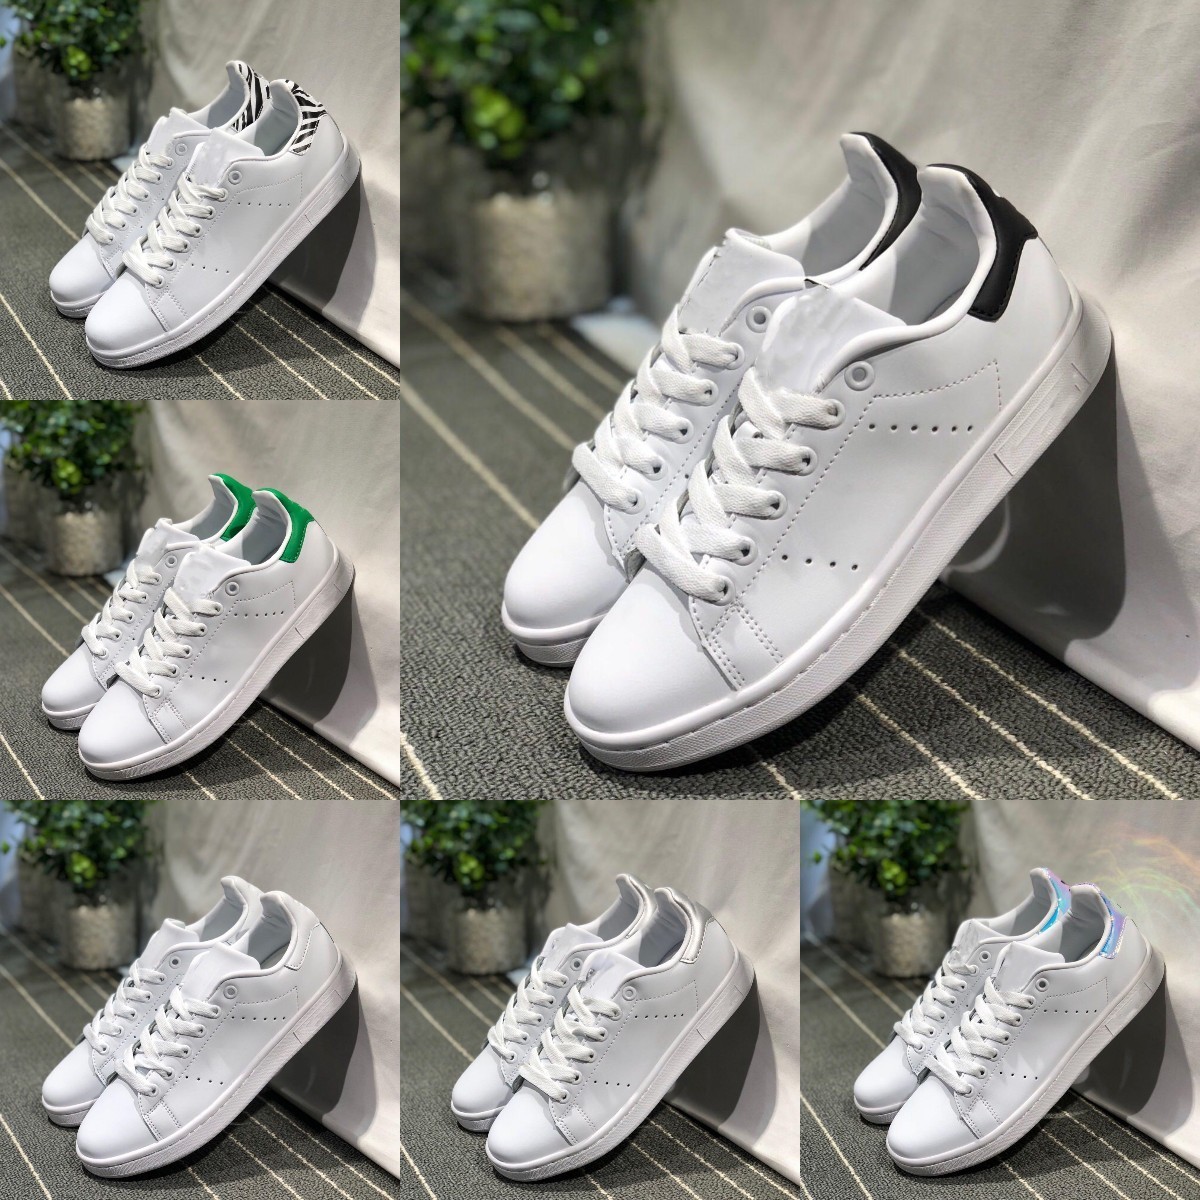 

2022 Mens Womens Free Superstar Casual Shoes Discount Designer White Black Pink Blue Gold Superstars 80s Pride Sneakers Super Star Women Men Sport Sneakers Y688, Please contact us